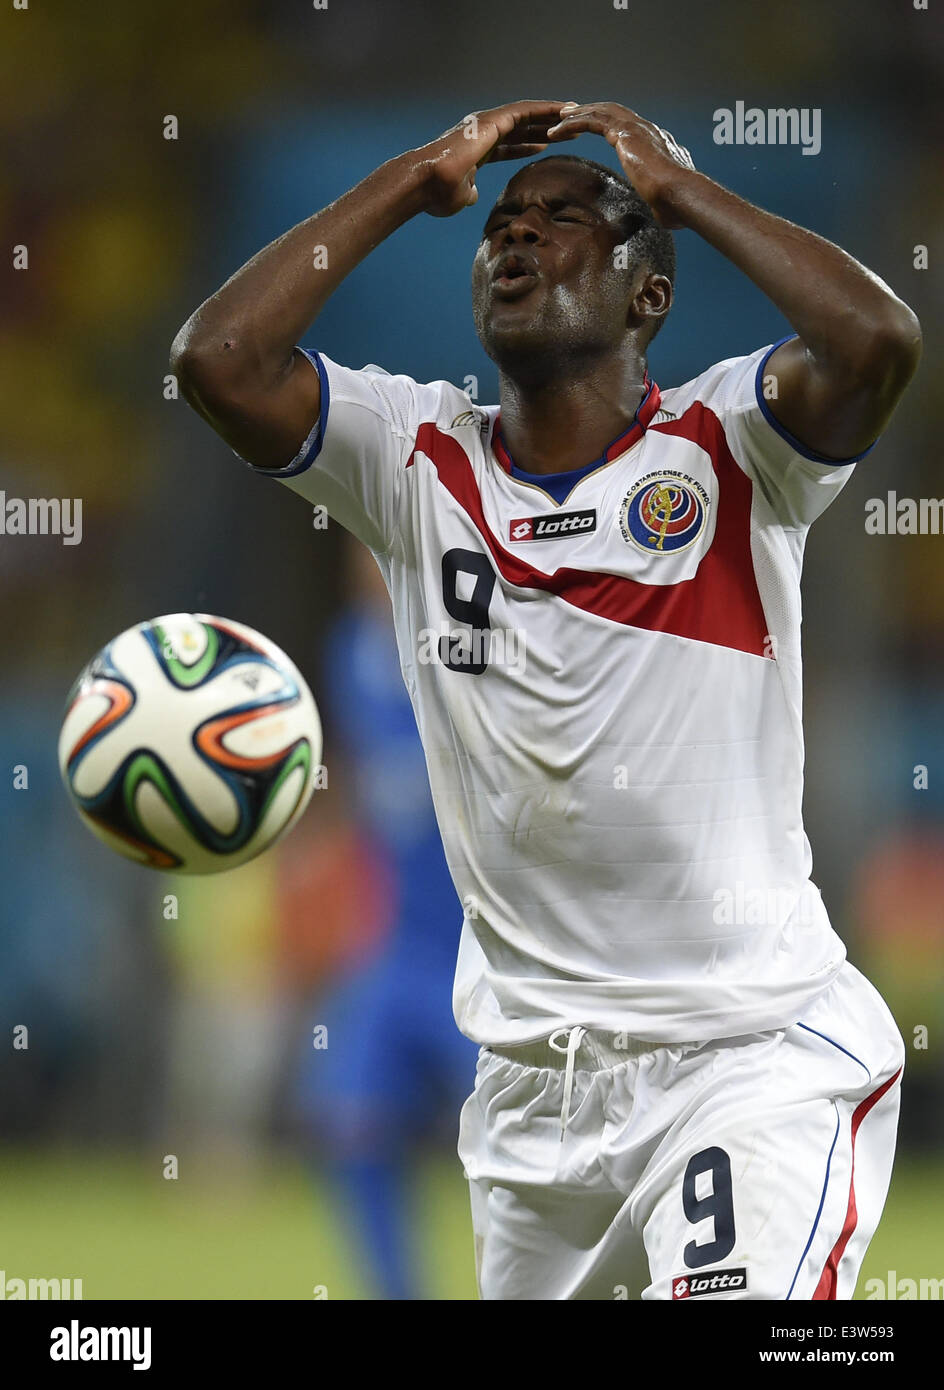 Recife, Brazil. 29th June, 2014. Costa Rica's Joel Campbell reacts during a Round of 16 match between Costa Rica and Greece of 2014 FIFA World Cup at the Arena Pernambuco Stadium in Recife, Brazil, on June 29, 2014. Credit:  Yang Lei/Xinhua/Alamy Live News Stock Photo